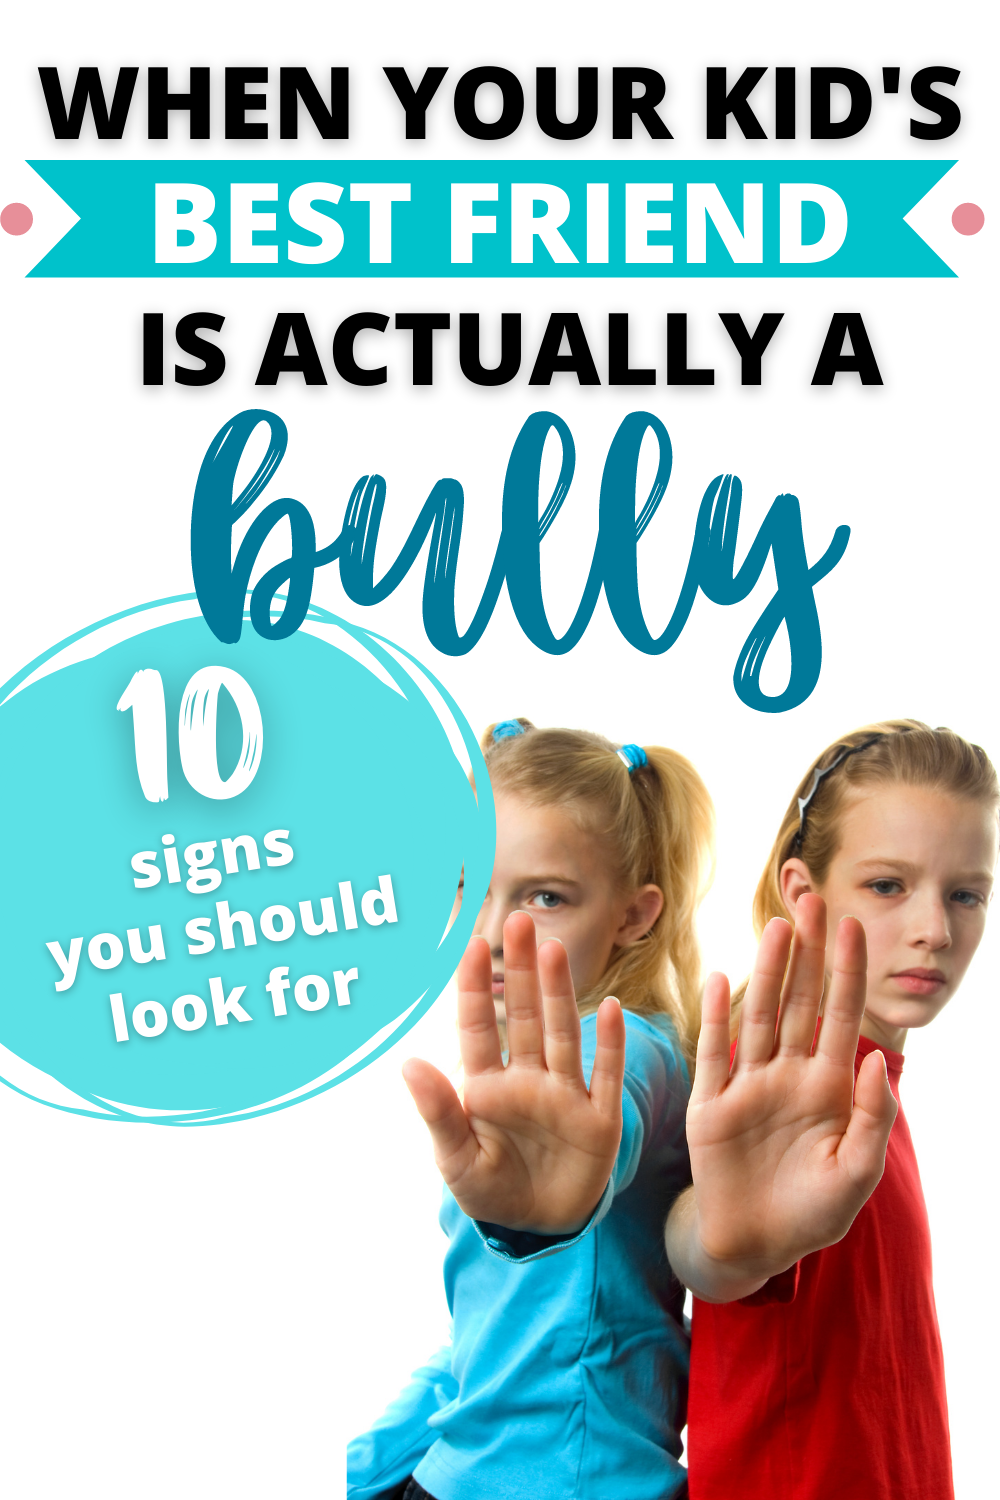 10 Warning signs your kid's best friend is actually a bully, via @lara_neves